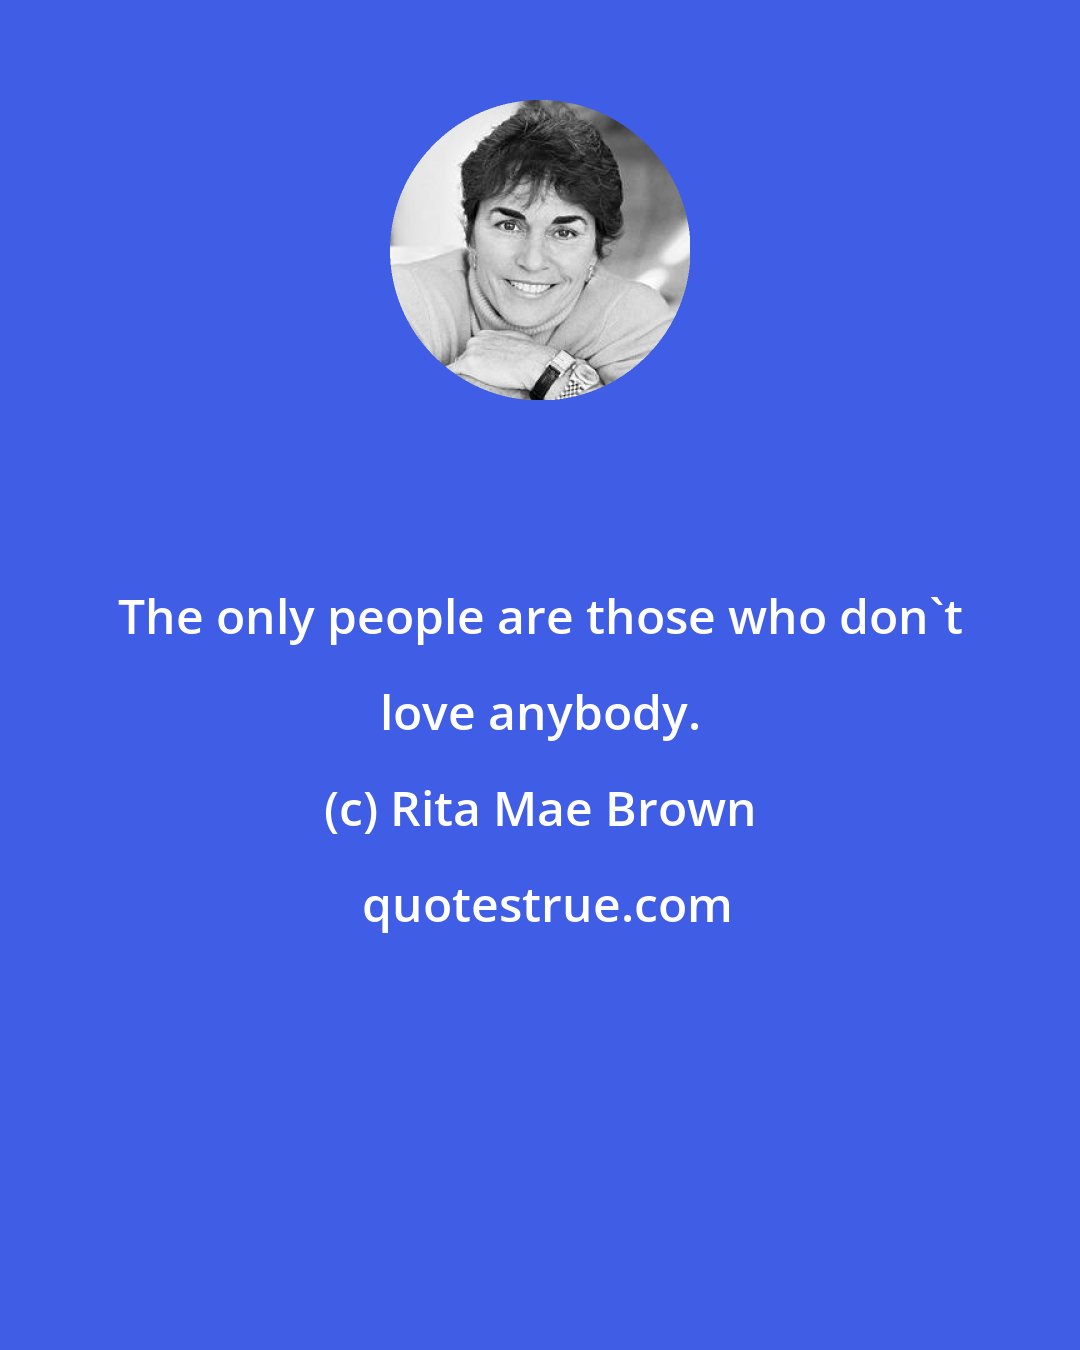 Rita Mae Brown: The only people are those who don't love anybody.